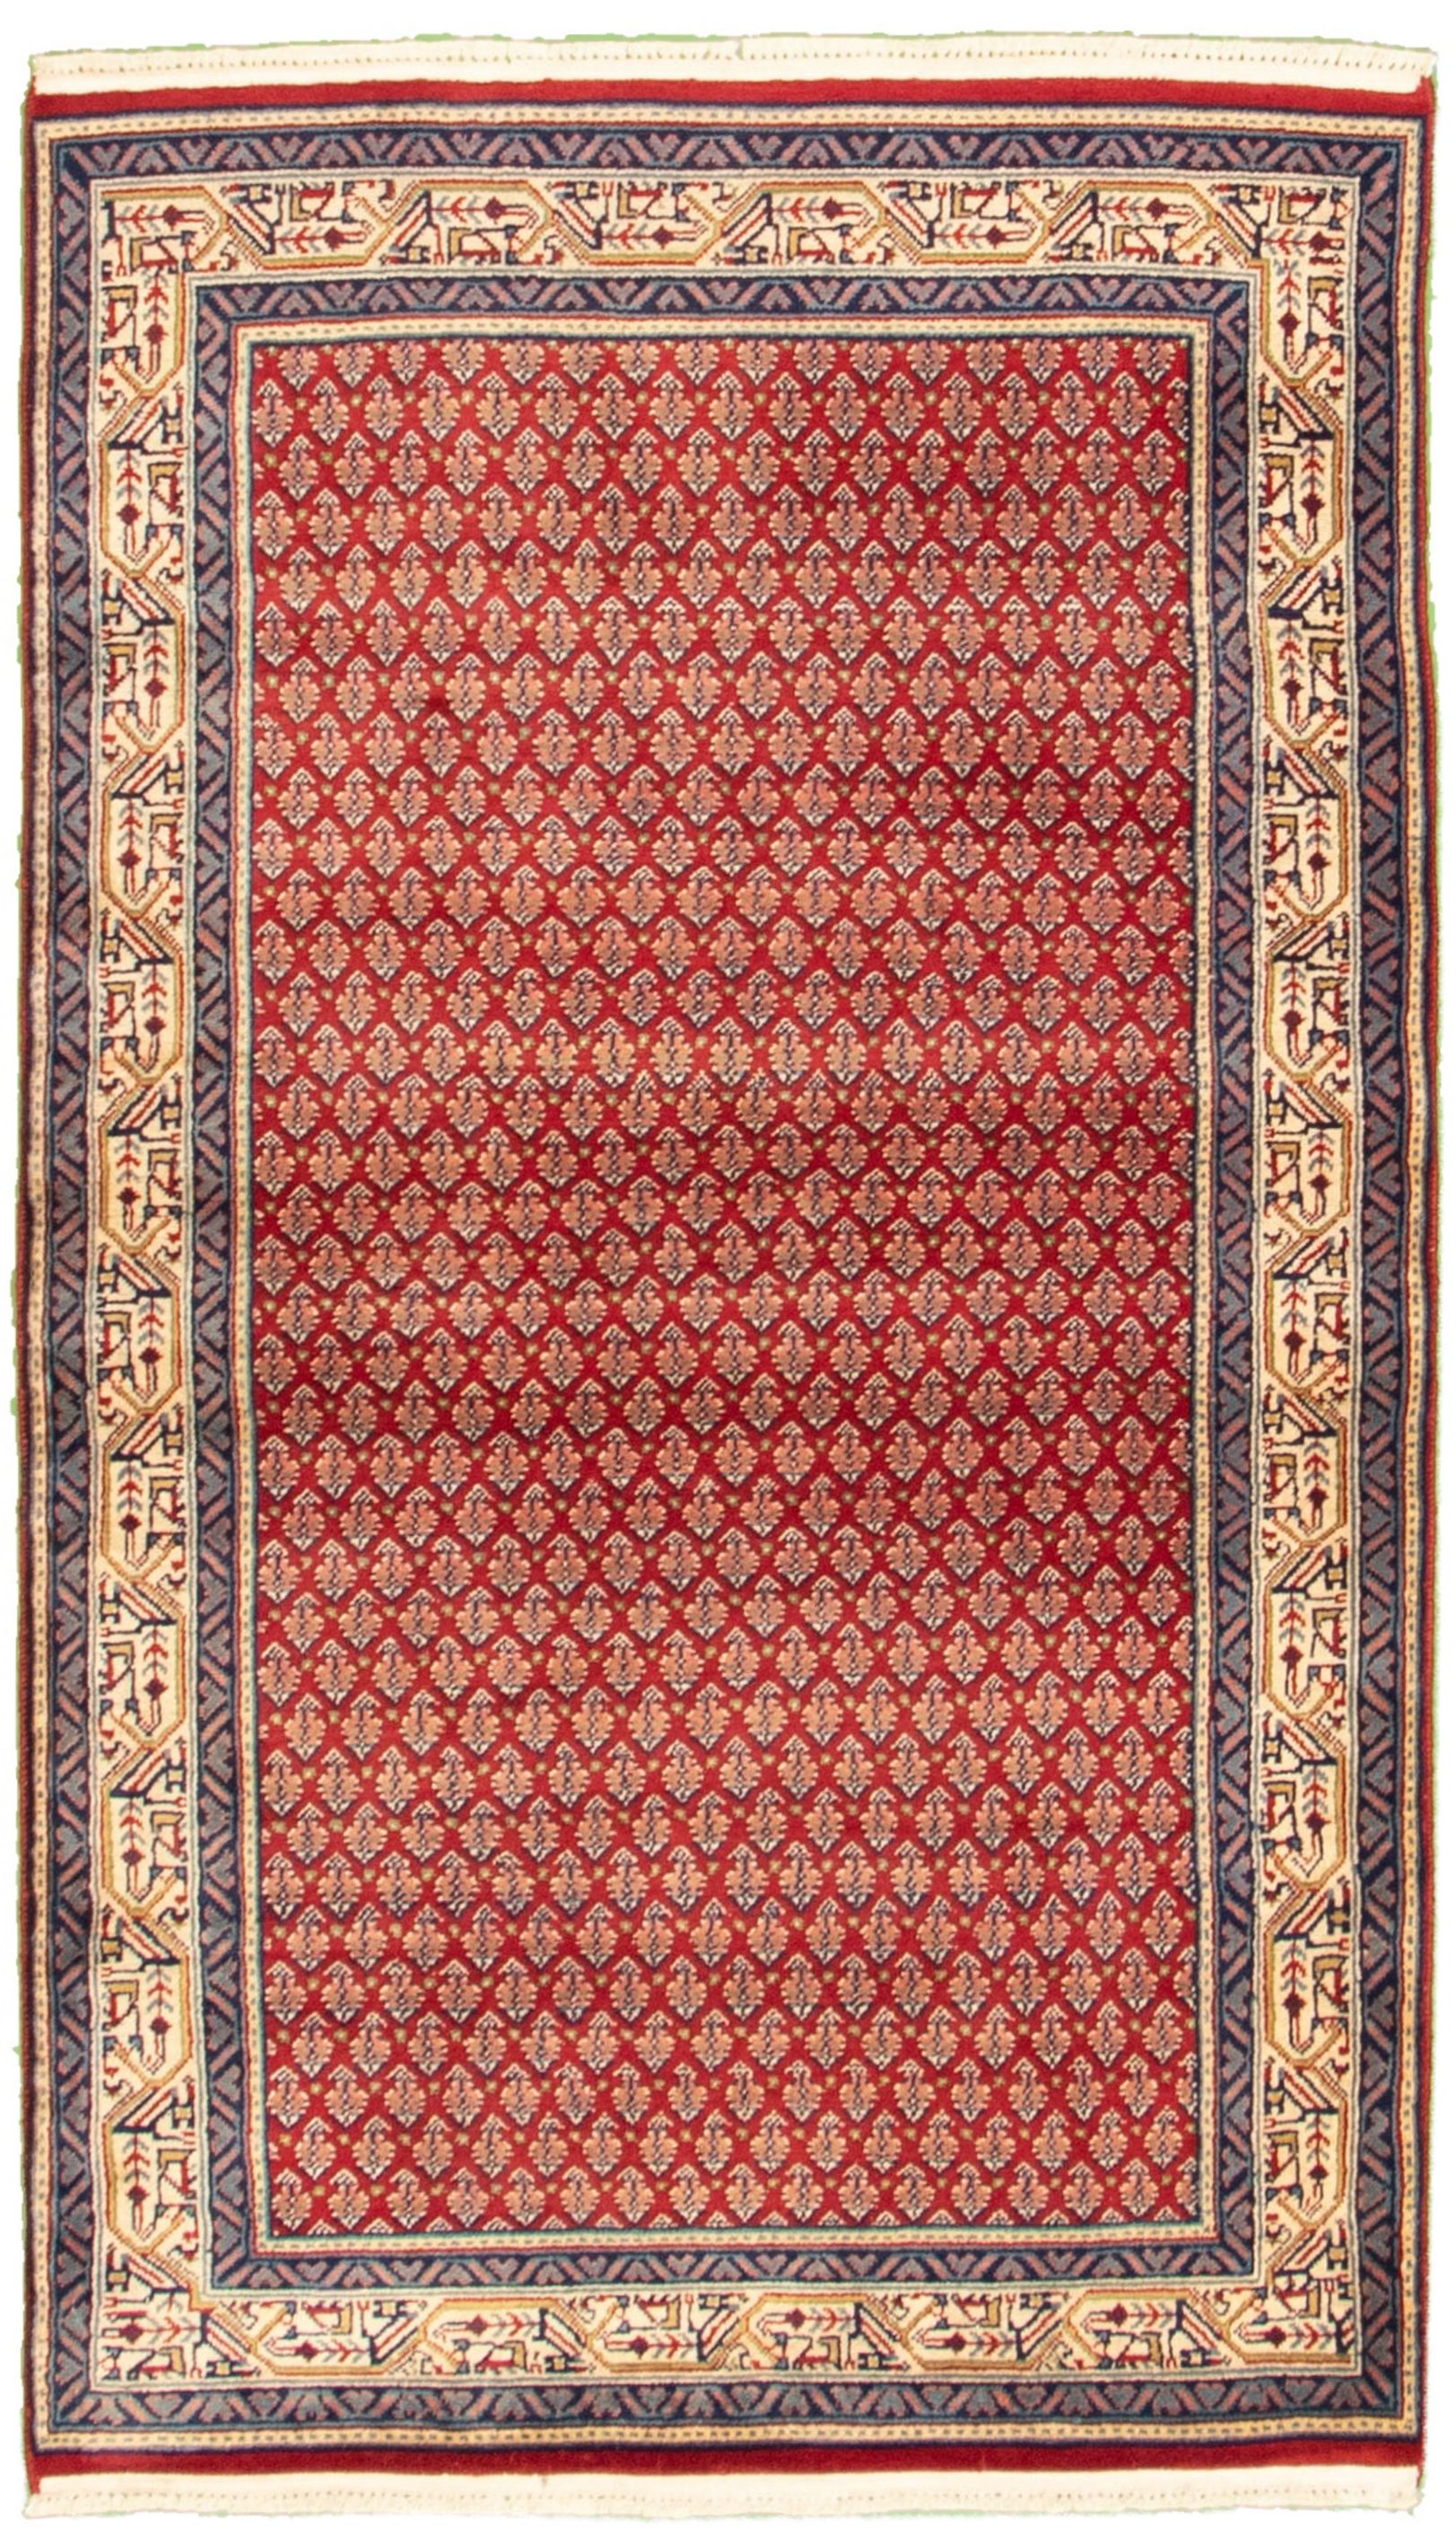 Hand-knotted Royal Sarough Red Wool Rug 2'11" x 5'2" Size: 2'11" x 5'2"  